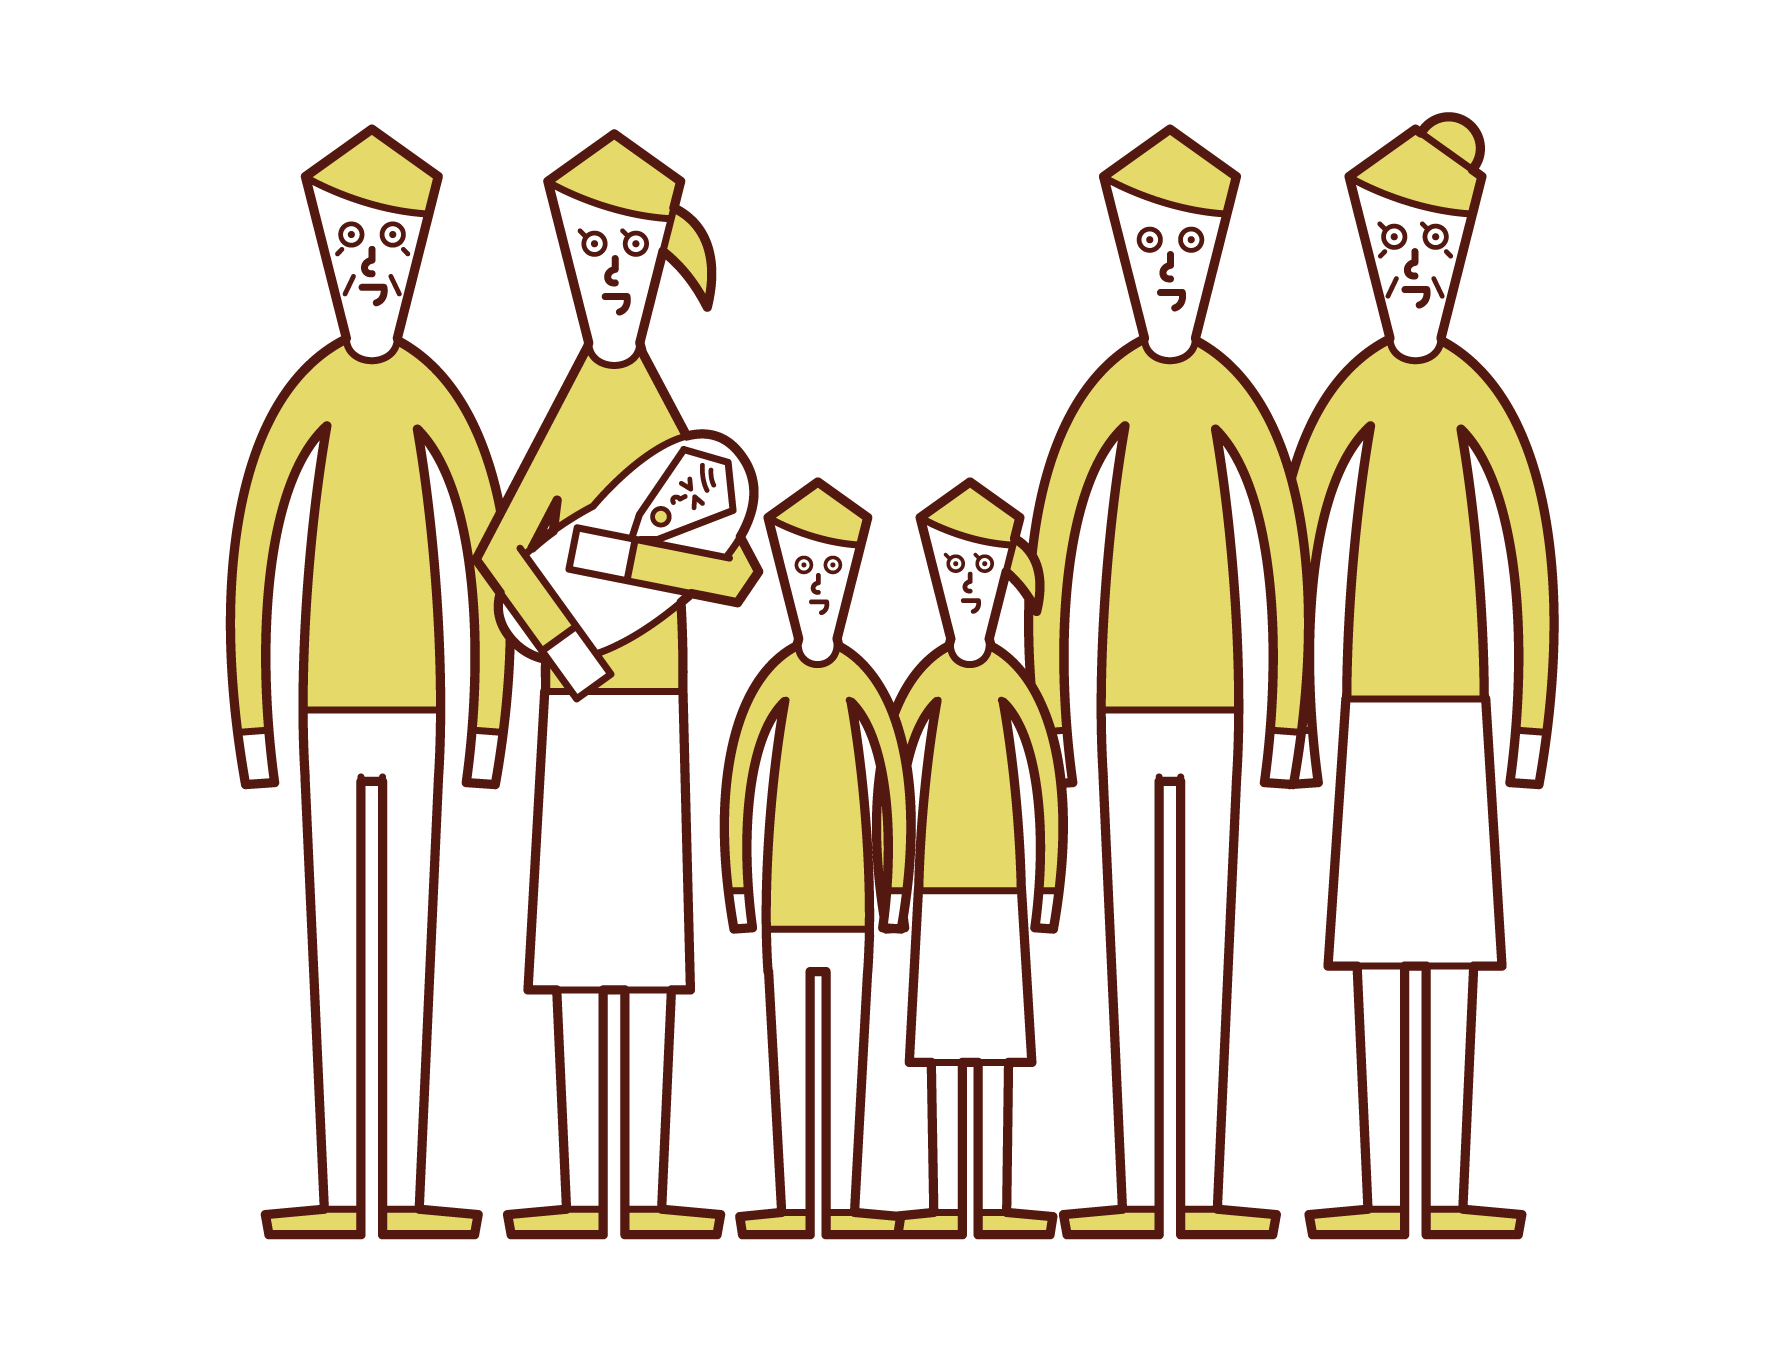 Illustration of a large family